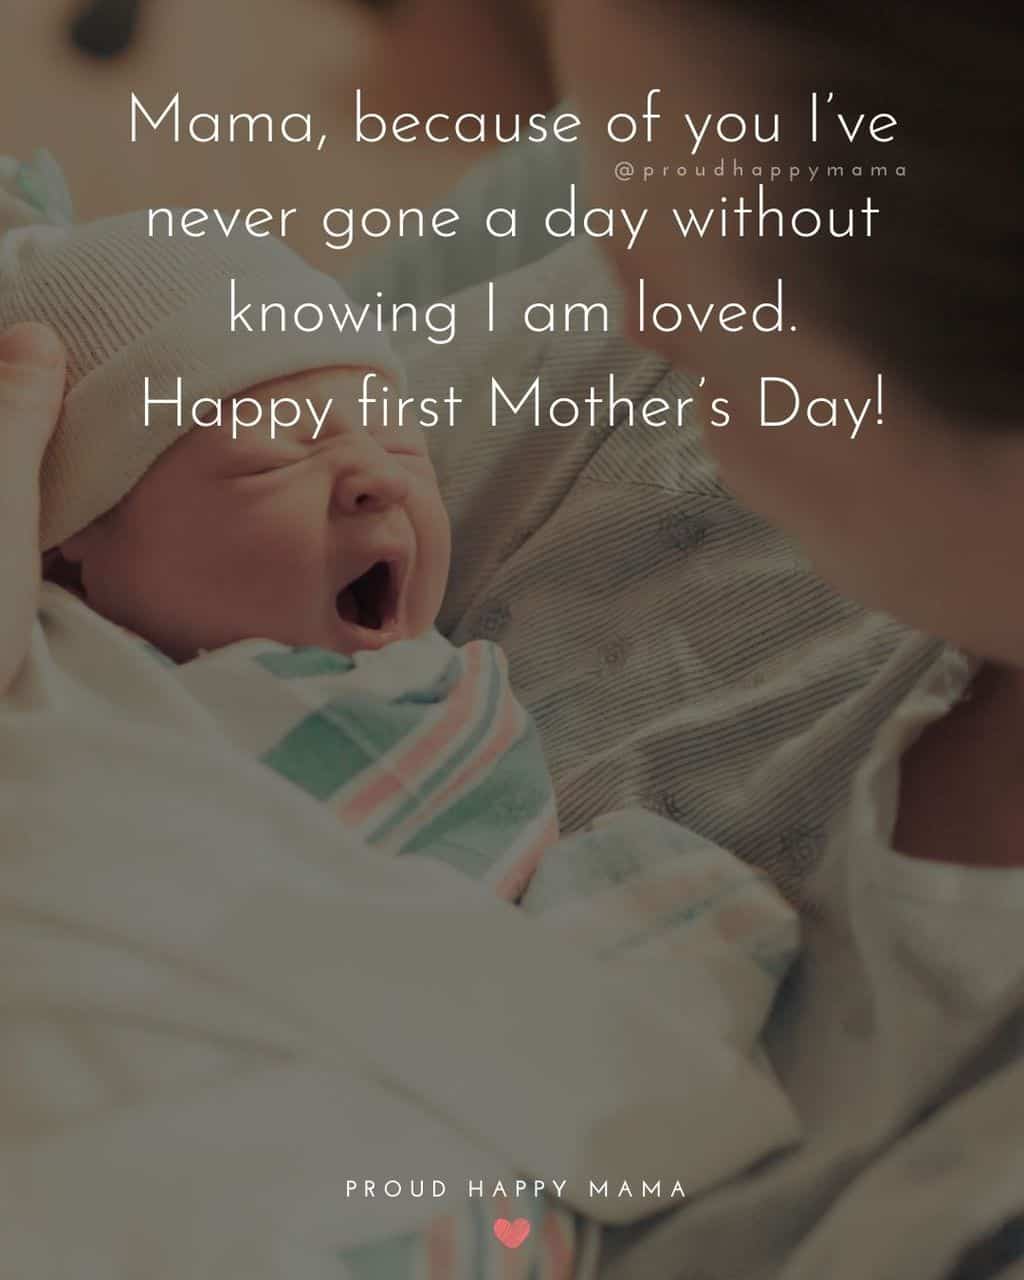 first Mother’s Day quotes - Mama, because of you Ive never gone a day without knowing I am loved. Happy first Mothers Day